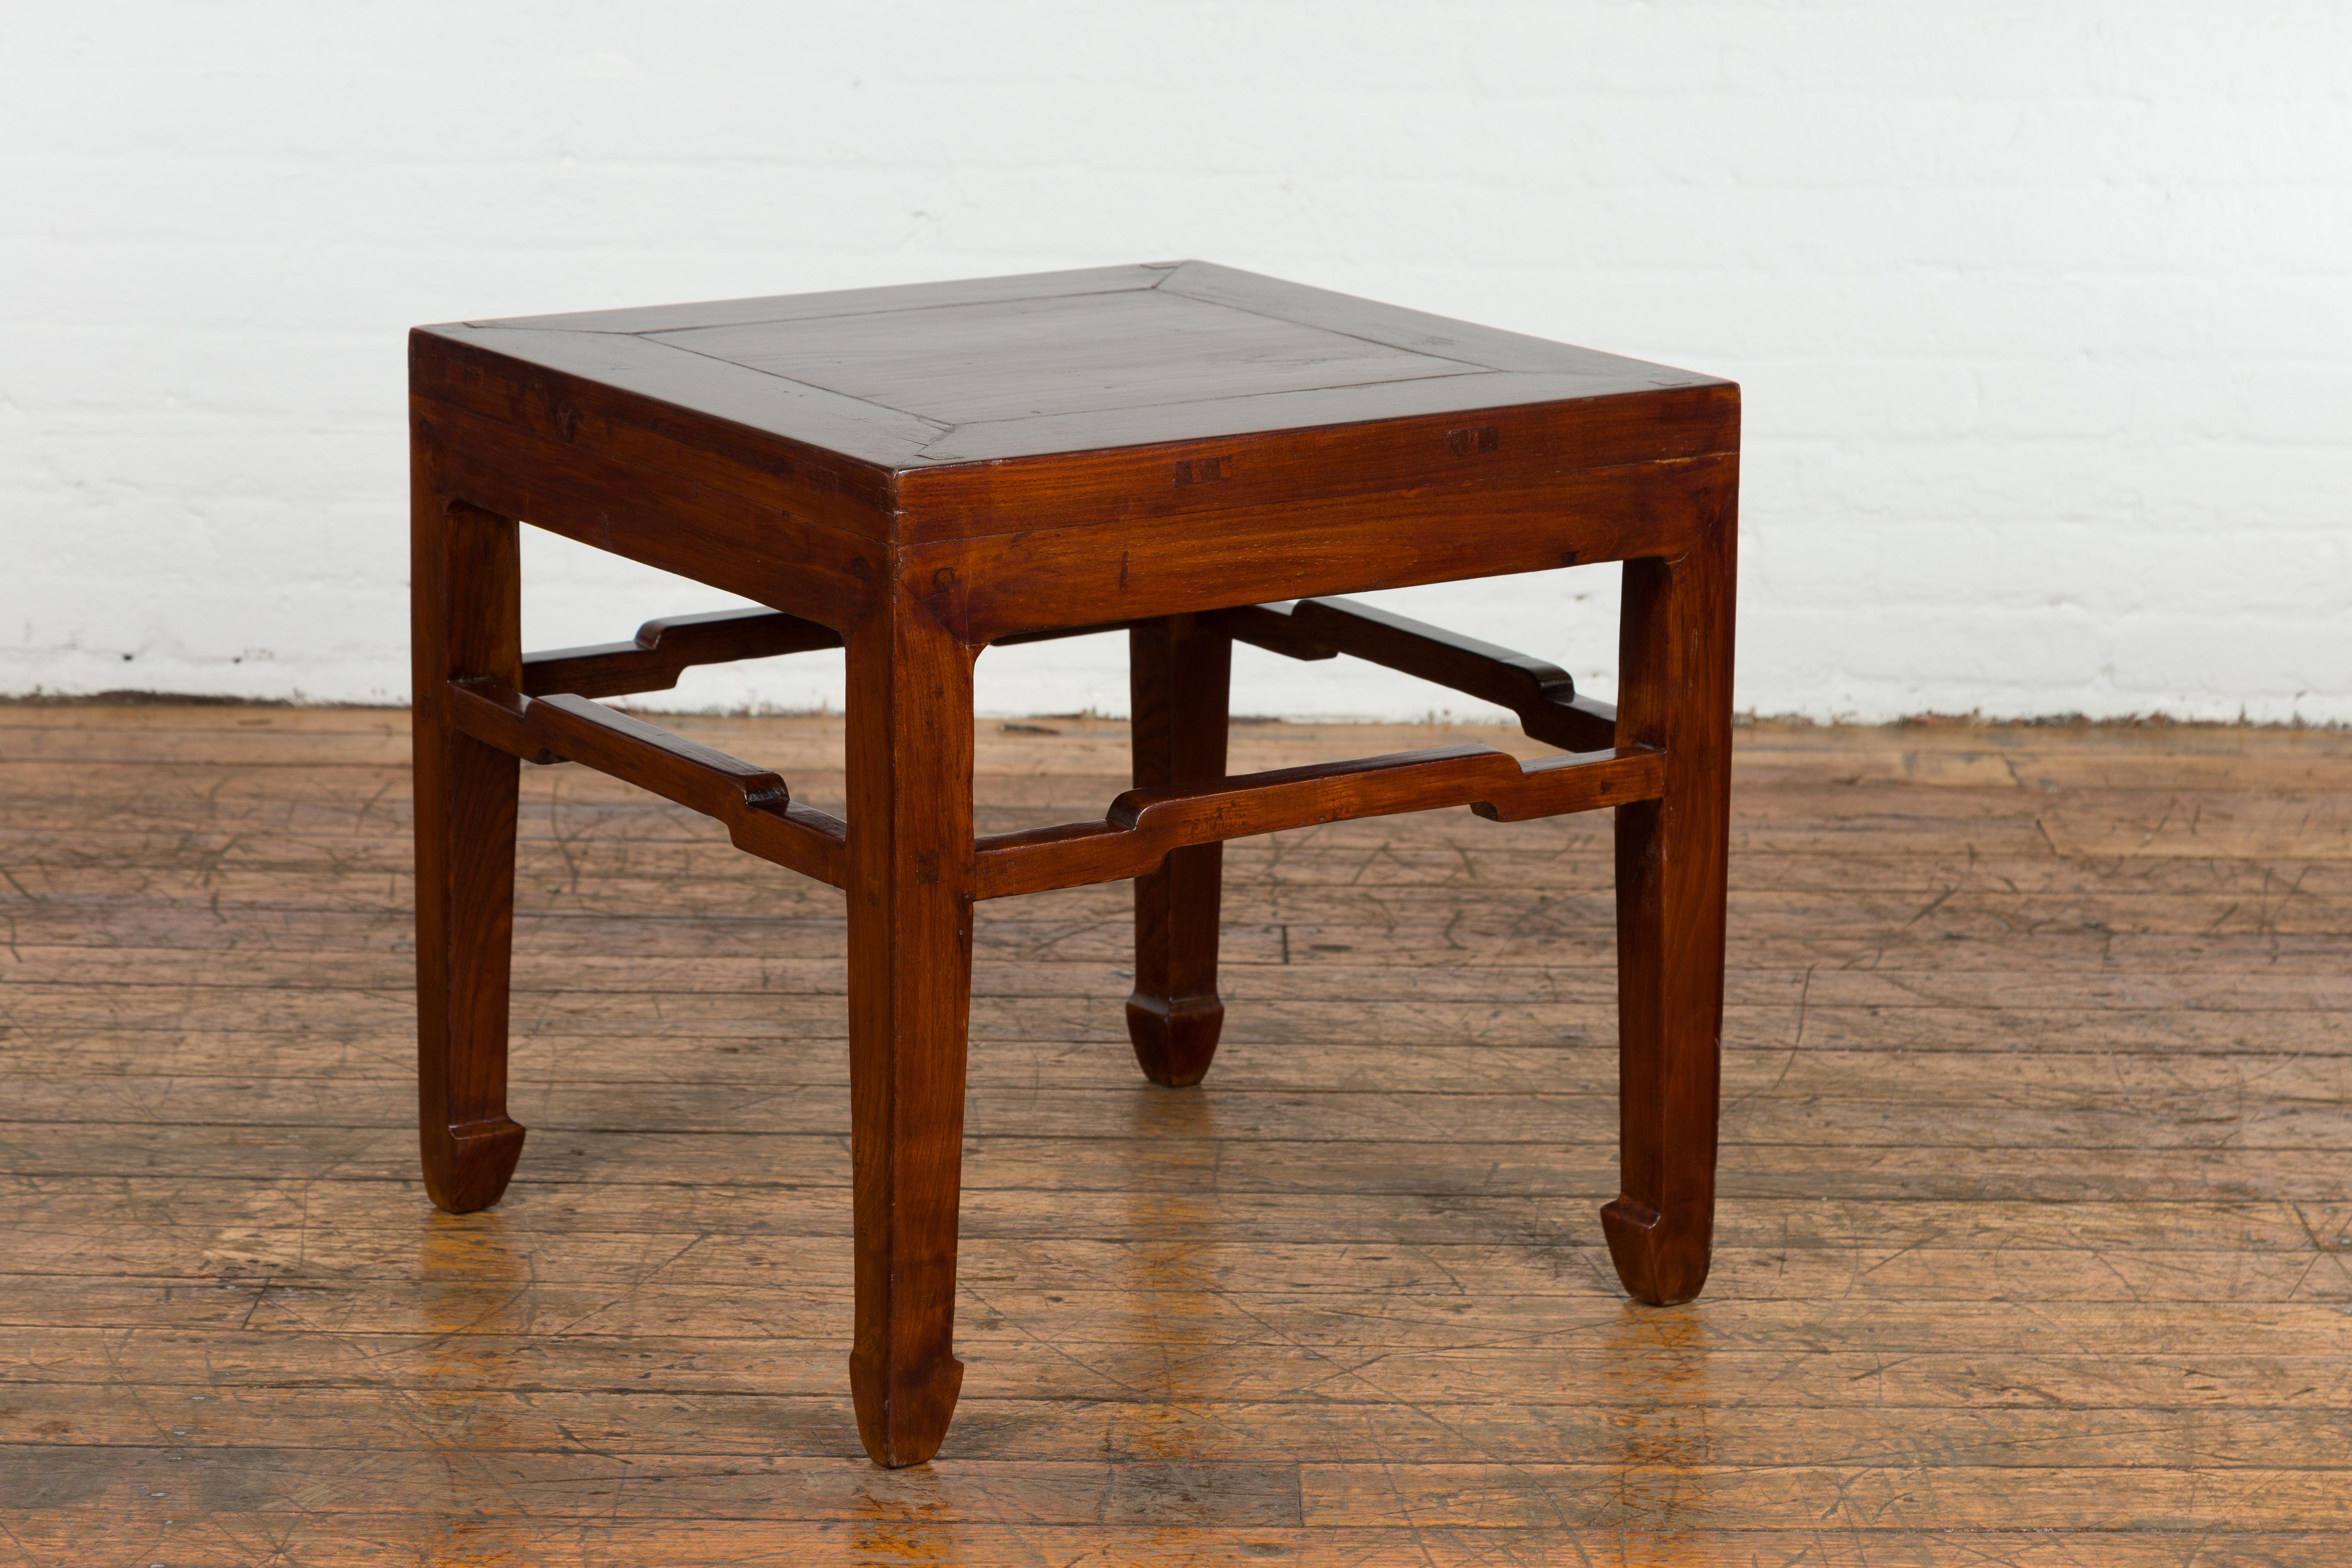 Chinese Qing Dynasty Period 19th Century Side Table with Humpback Stretchers For Sale 4